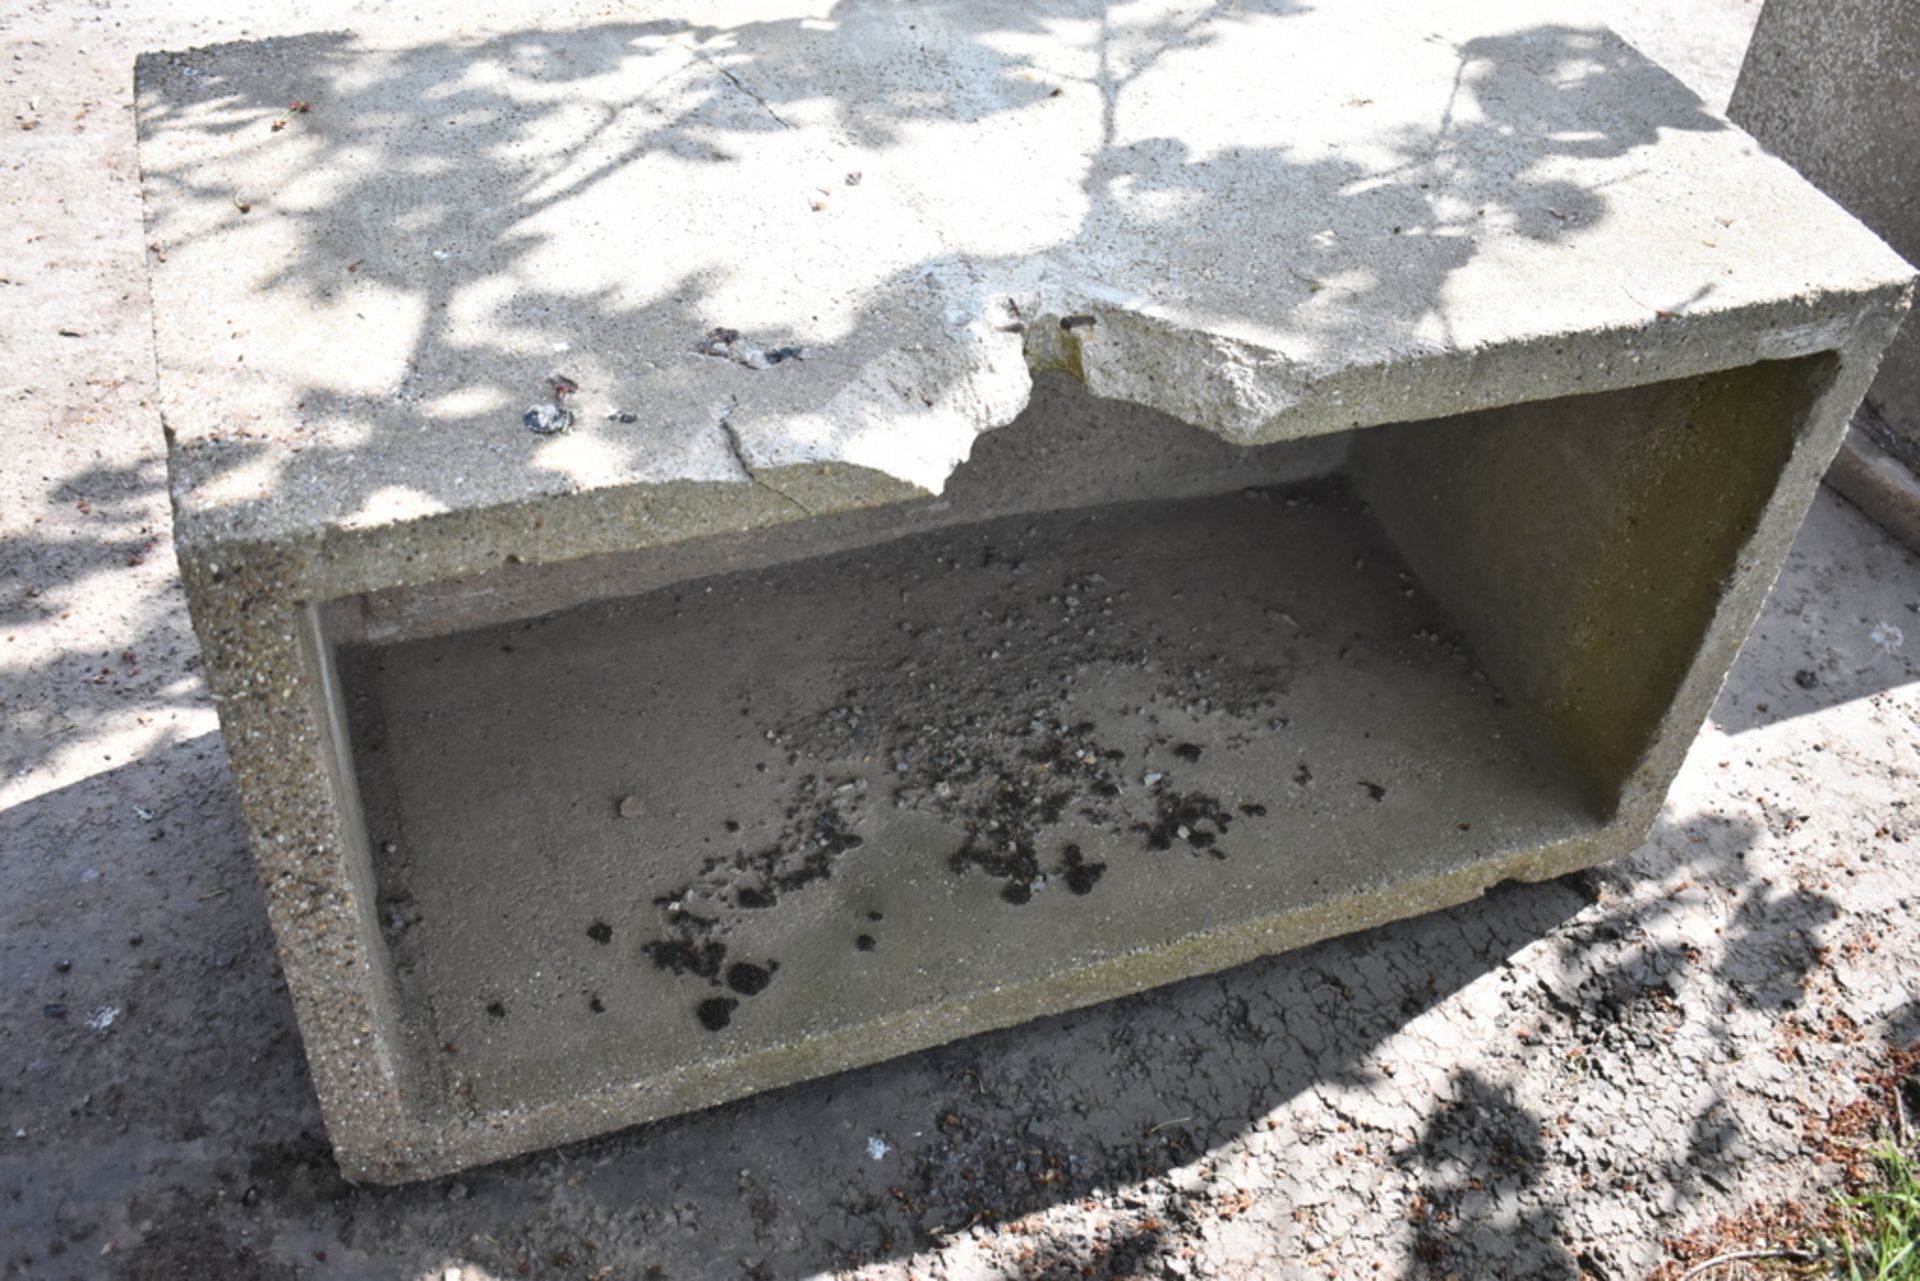 CONCRETE WATER TROUGH 54" LONG X 30" WIDE X 27" DEEP, FRACTURES - Image 2 of 3